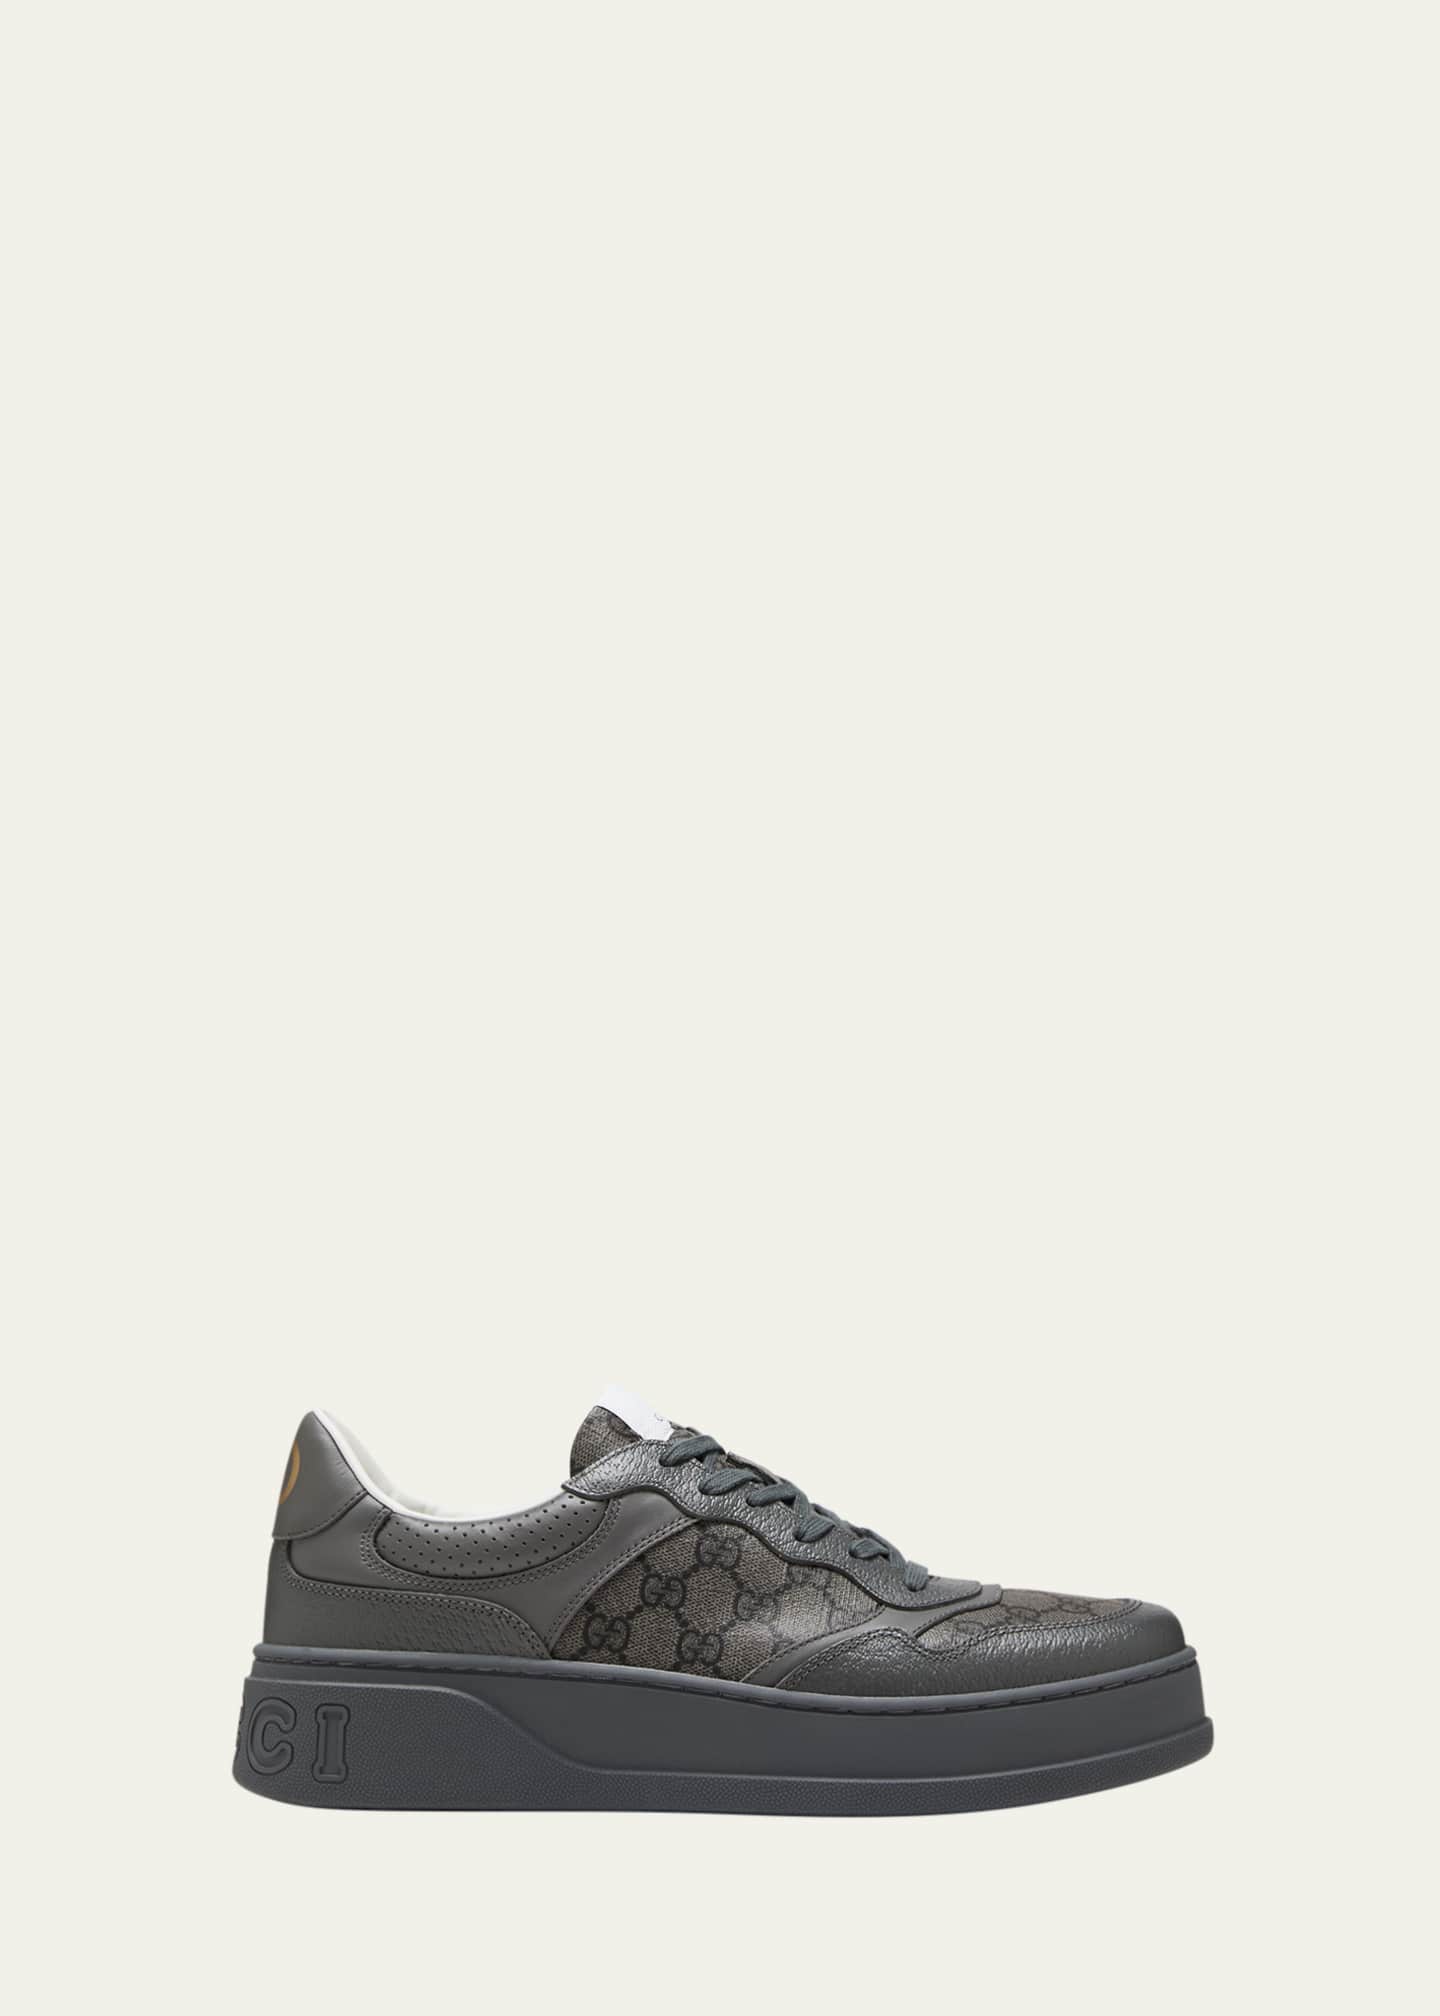 Gucci Men's Chunky B Low-top Sneakers - Grey Black - Size 11